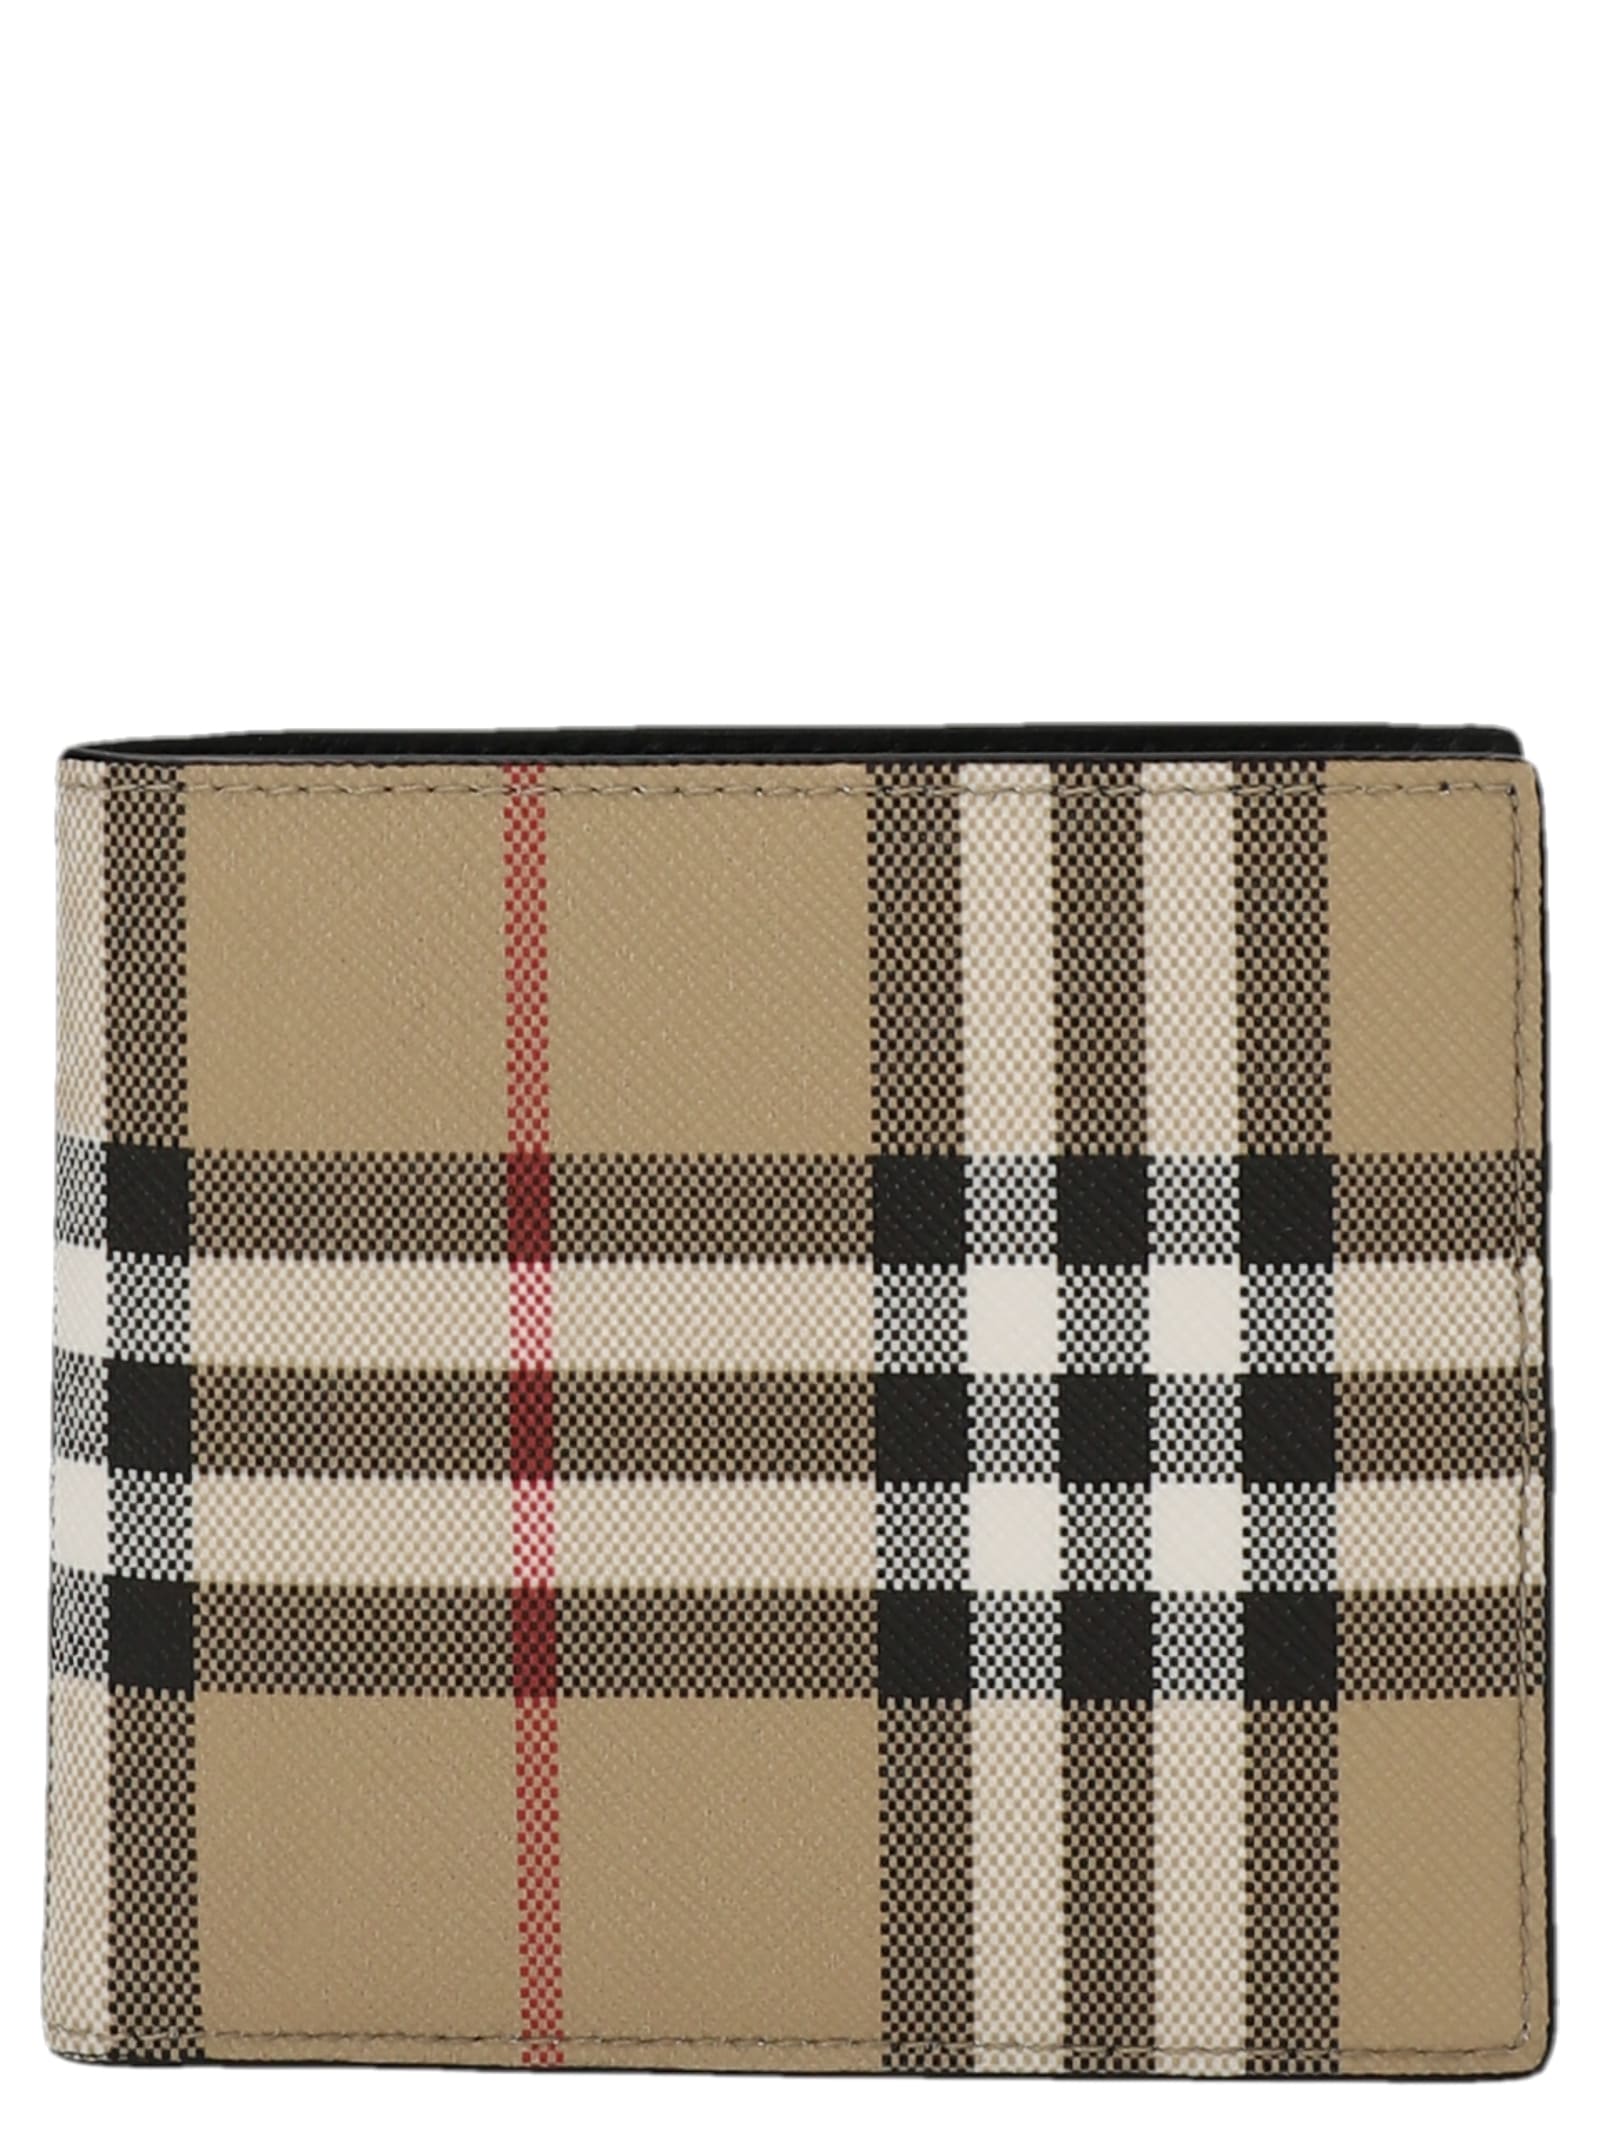 Burberry vintage Check Wallet